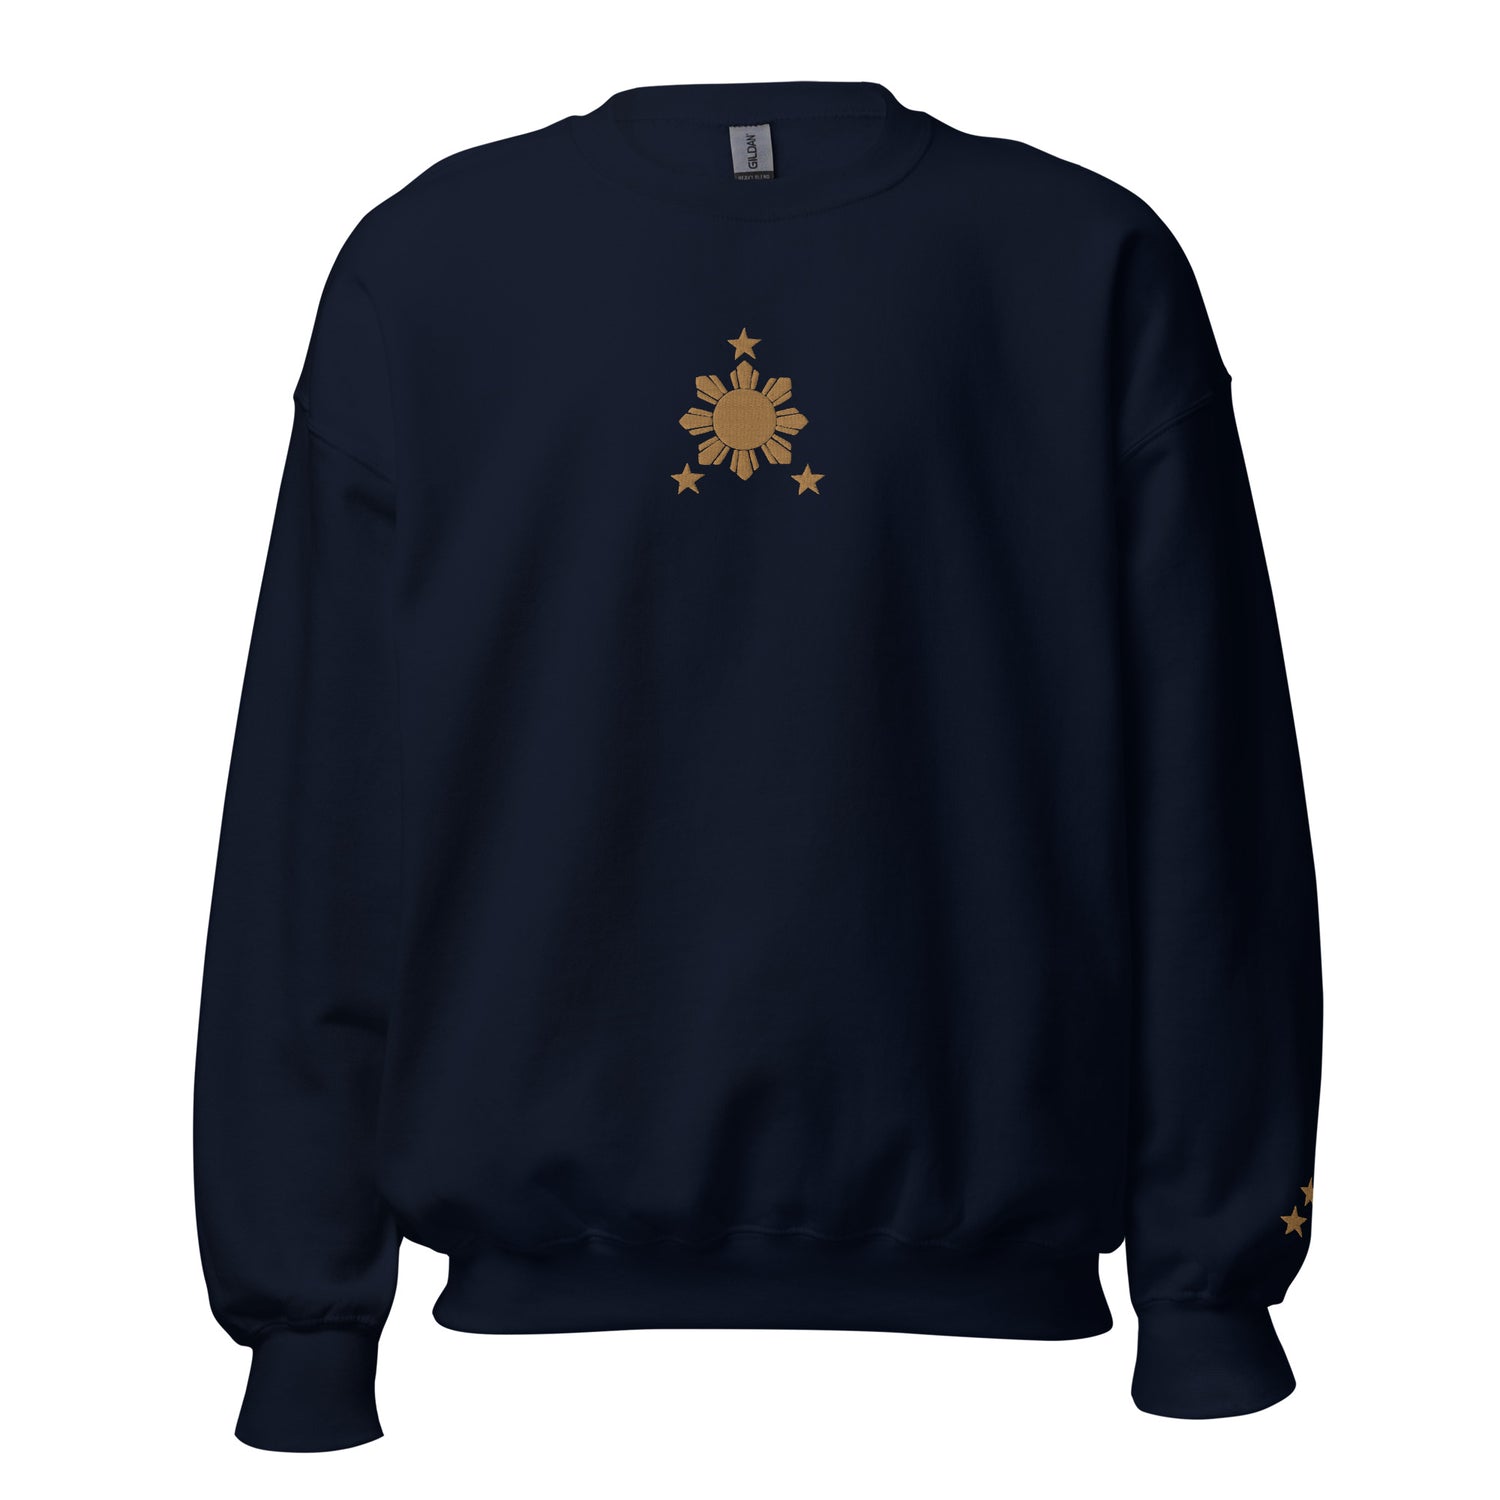 Stars and Sun Filipino Embroidered Crew Neck Sweatshirt in color variant Navy.